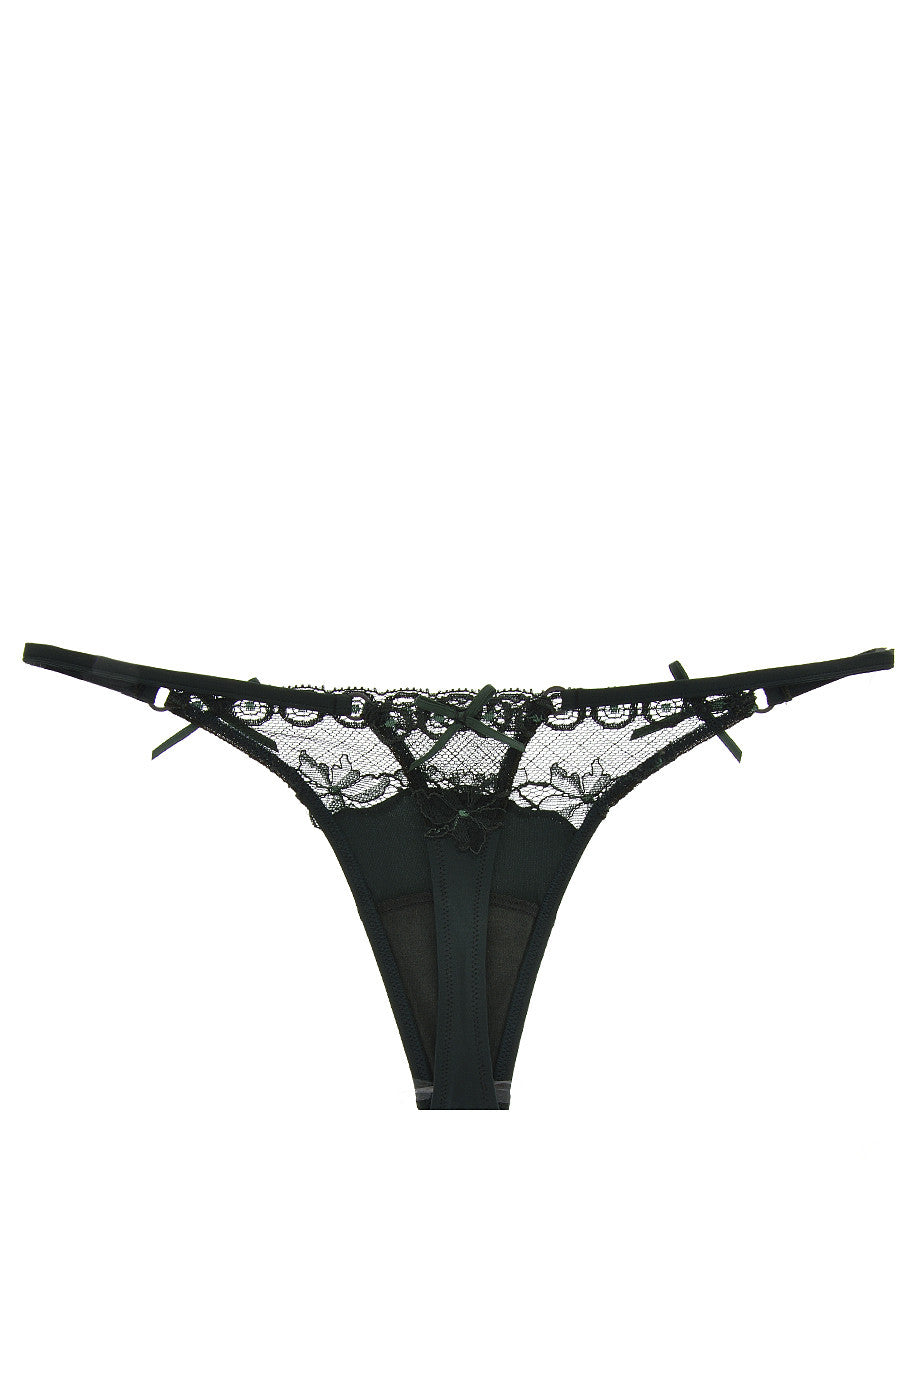 COTTON CLUB GREEN FLOWER Lace Sexy Thong – PRET-A-BEAUTE